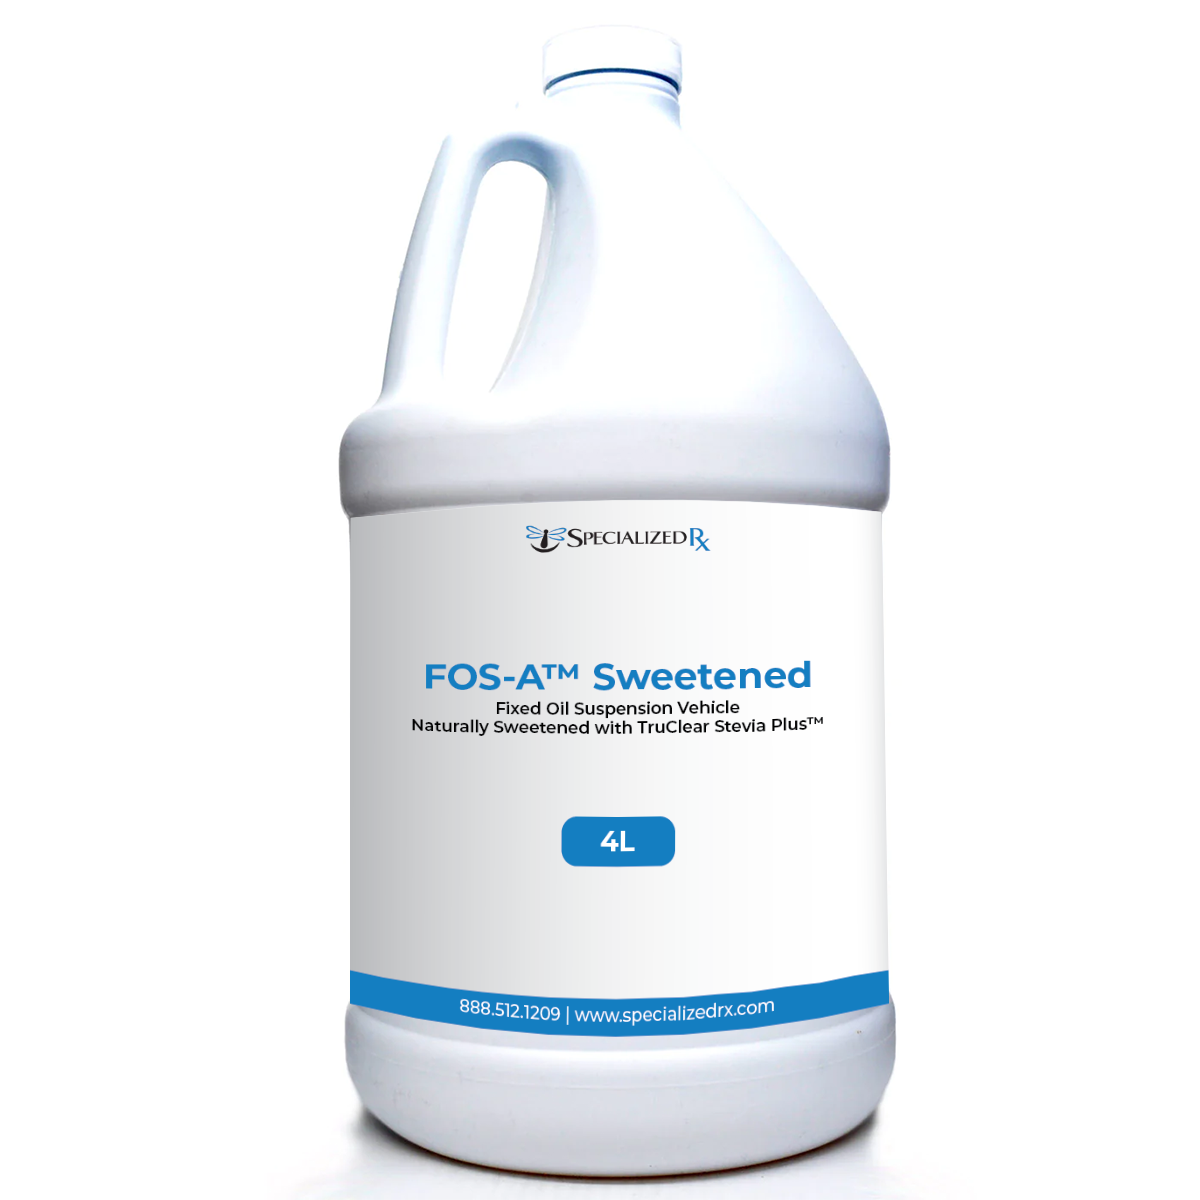 FOS-A™ (Sweetened) Fixed Oil Suspension Vehicle